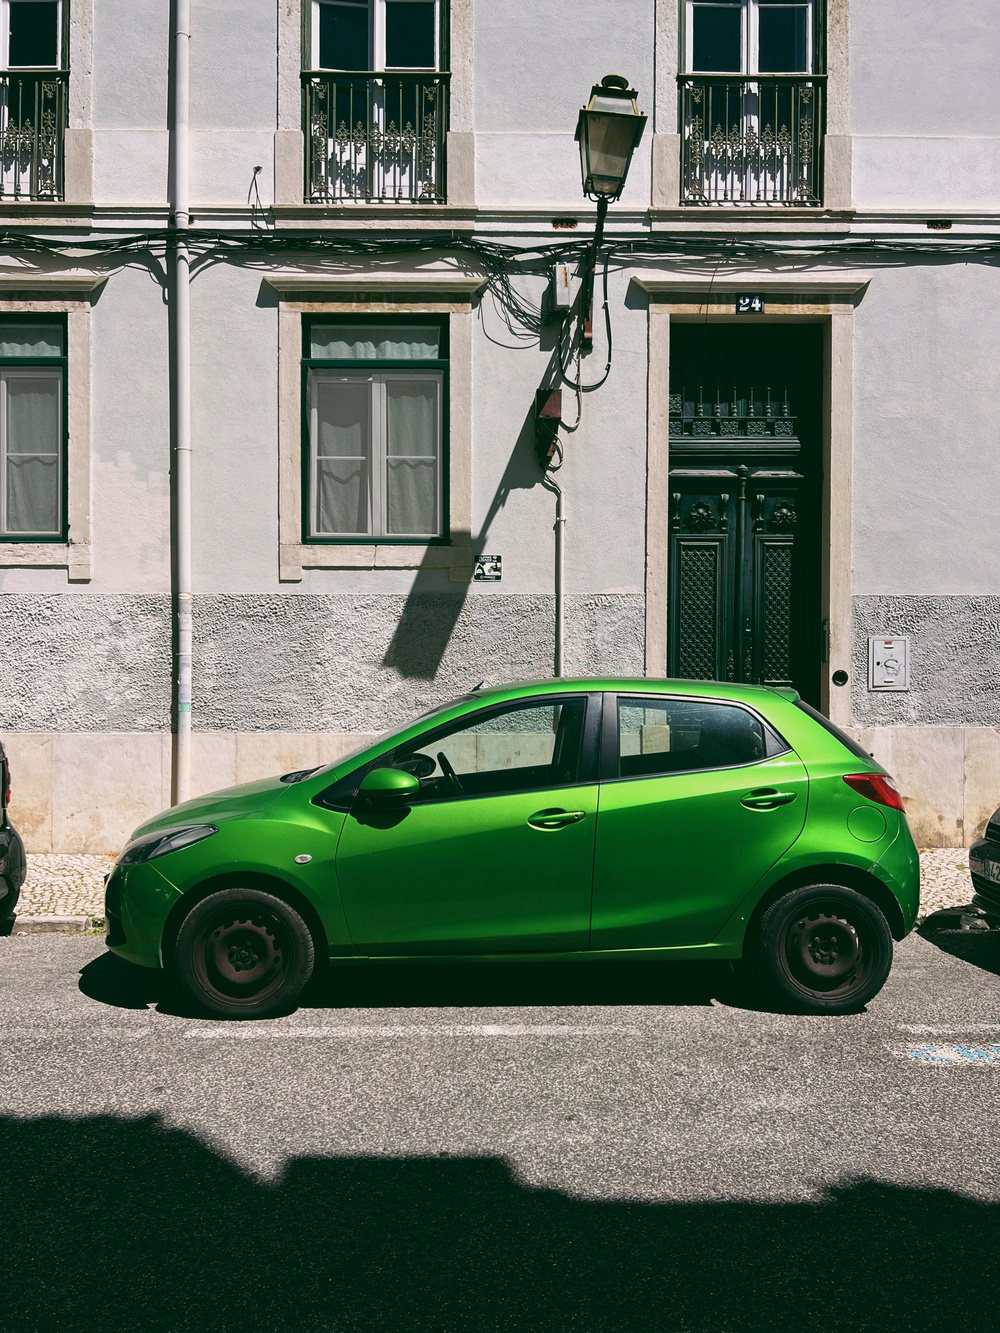 a green car parked in the street.